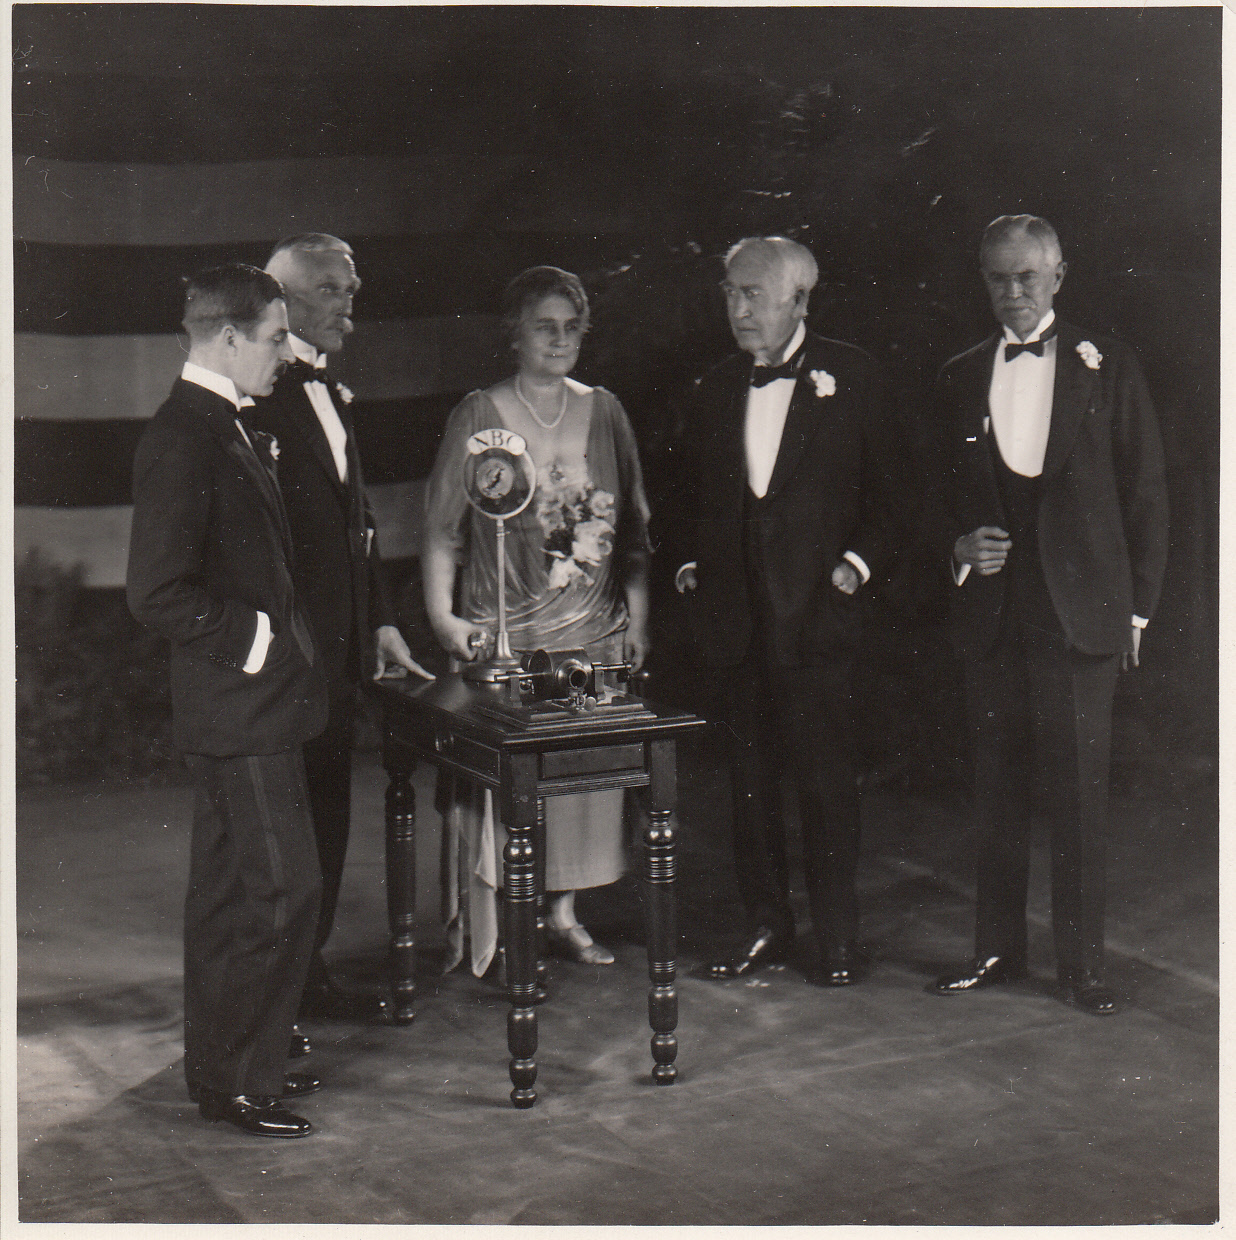 Congressional Medal presentation, Thomas Edison and Mina Edison with Messrs. Campbell, Mellon, and Hibben.